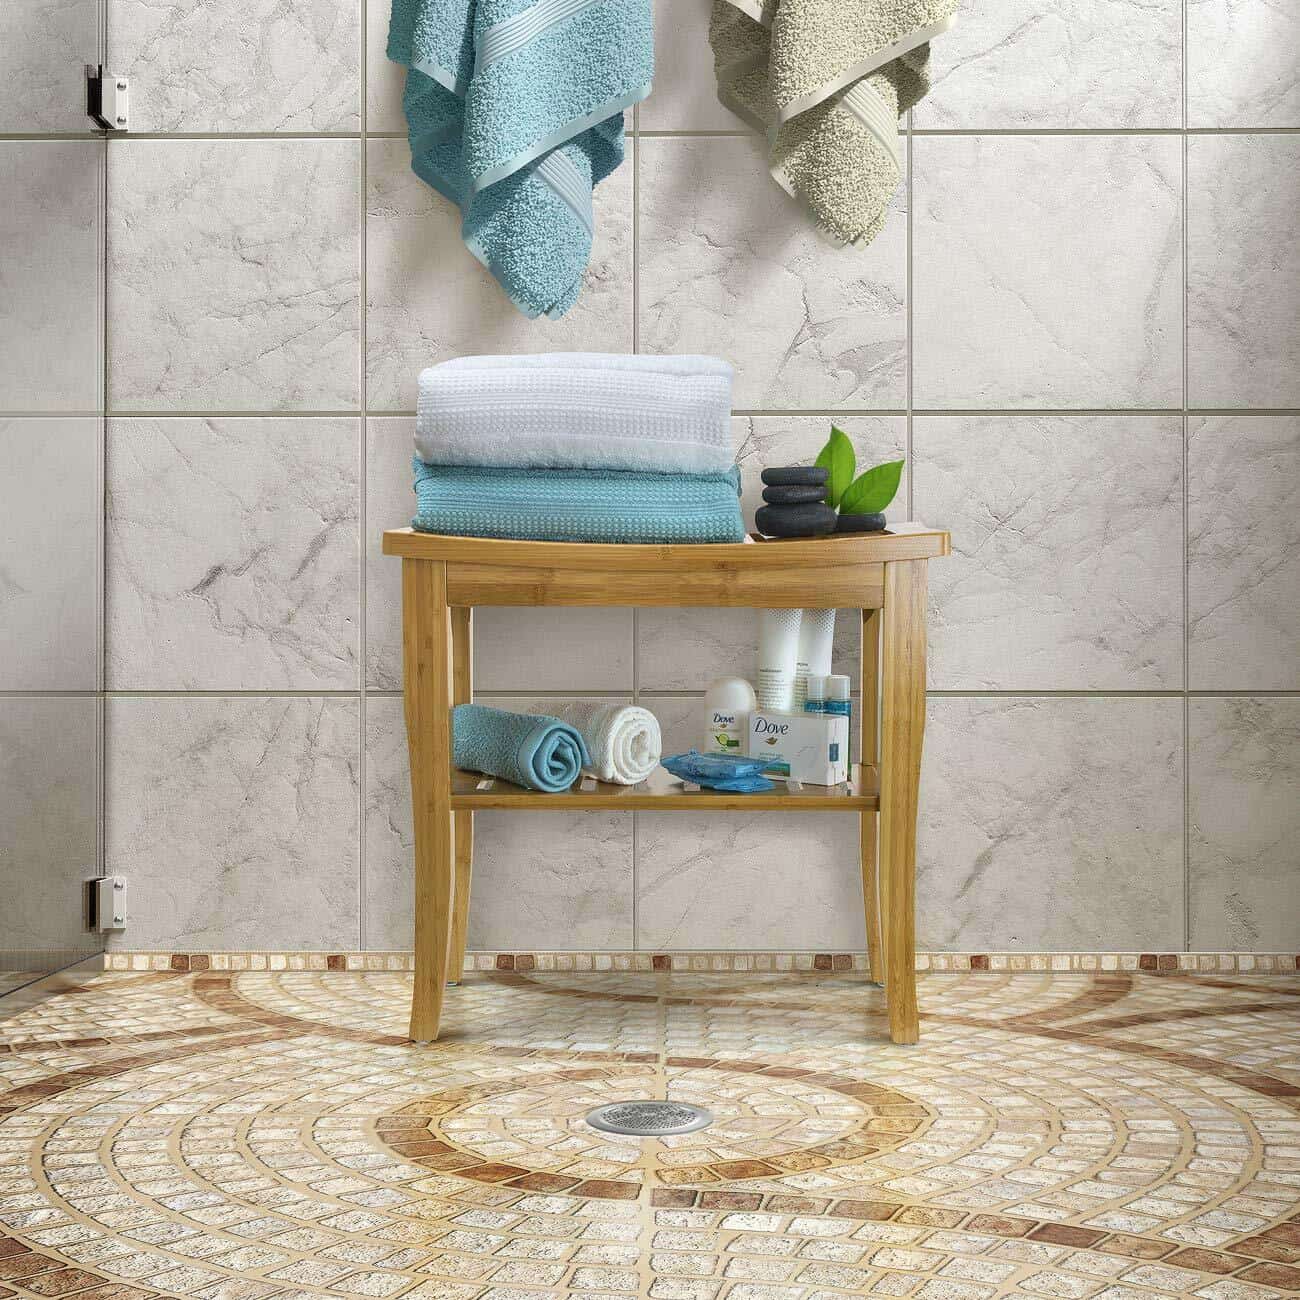 A bathroom with a bench and towels on a tiled floor.